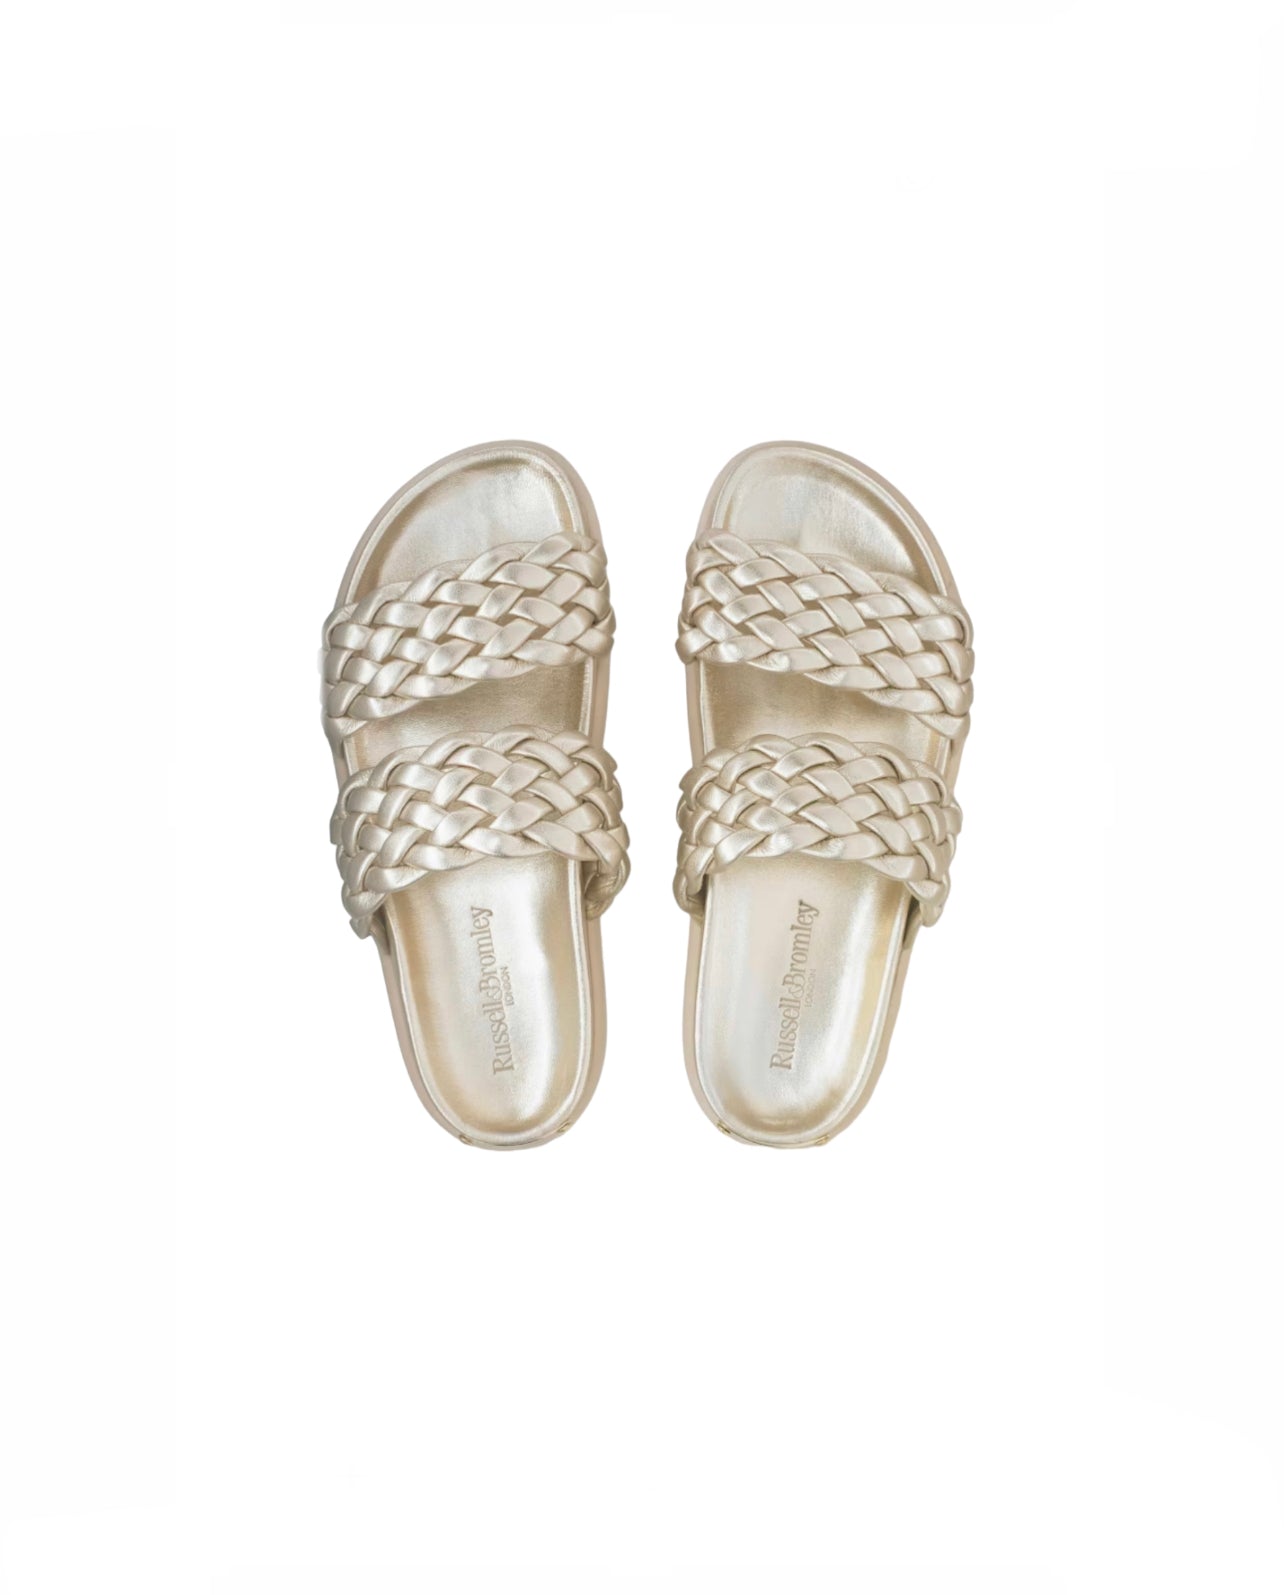 Russell and Bromley Gold Braided Sandals